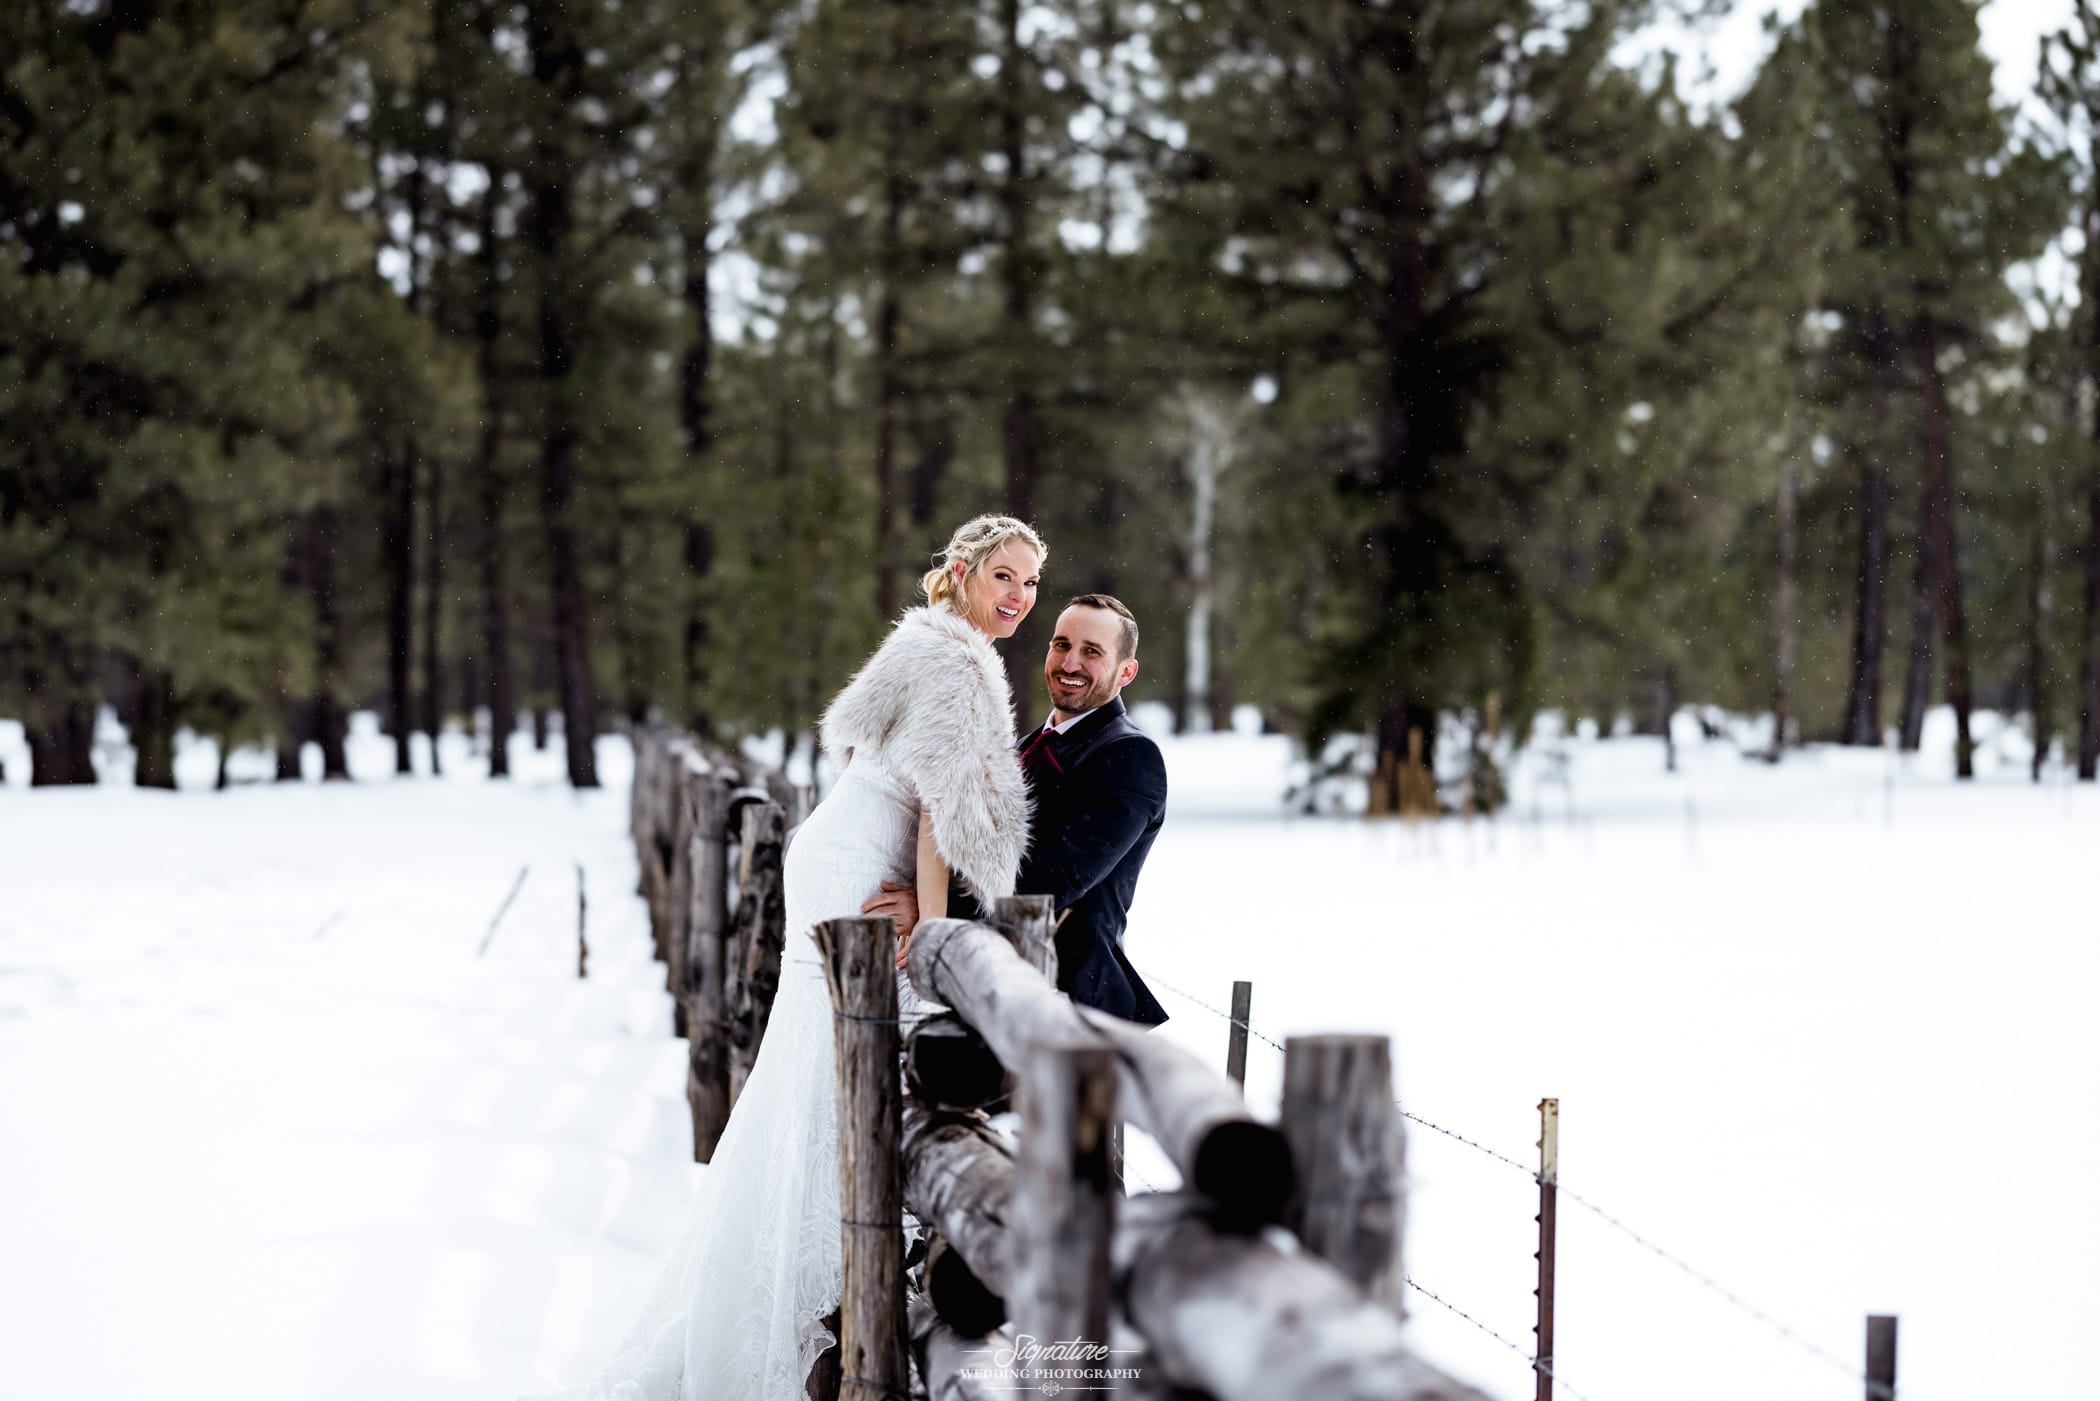 Bride and groom smiling on wooden fence